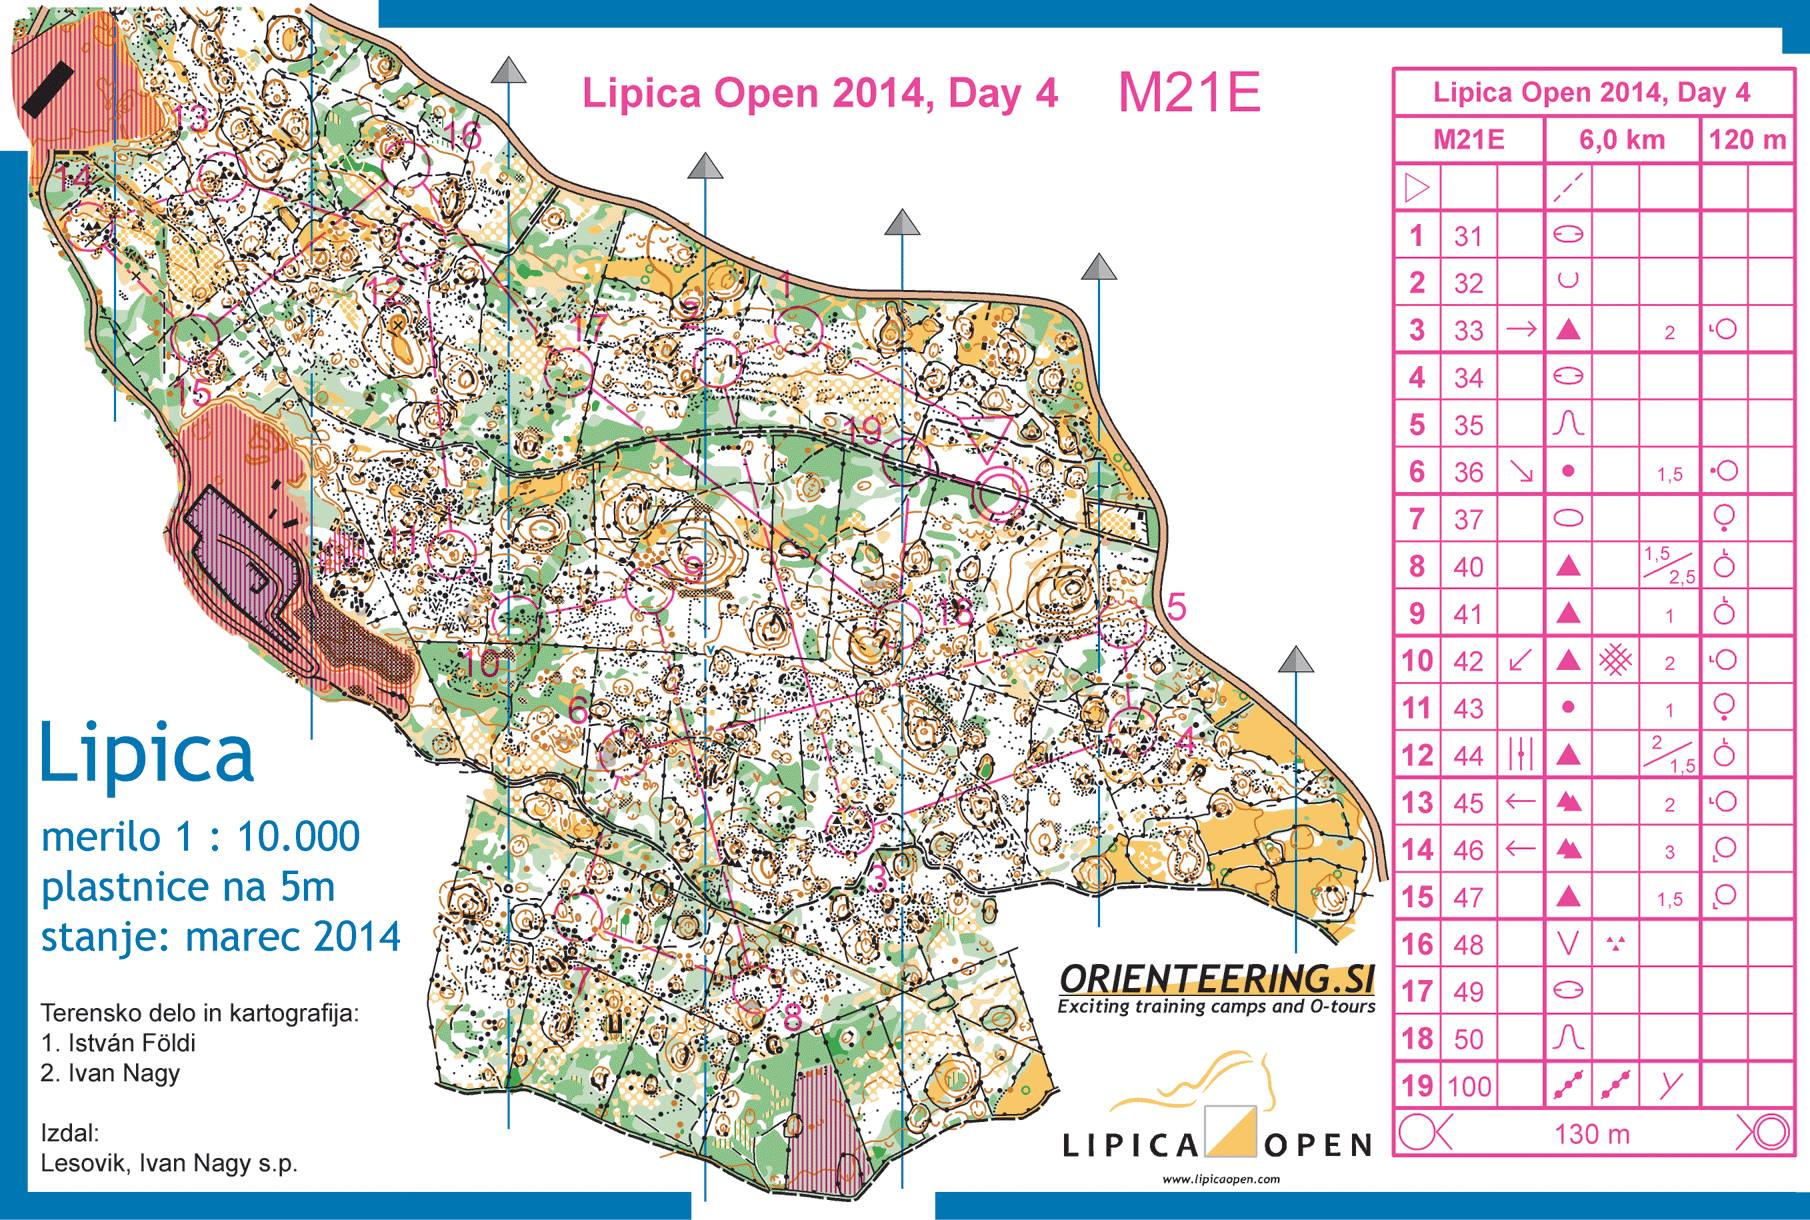 Lipica open - Stage 4 (11-03-2014)